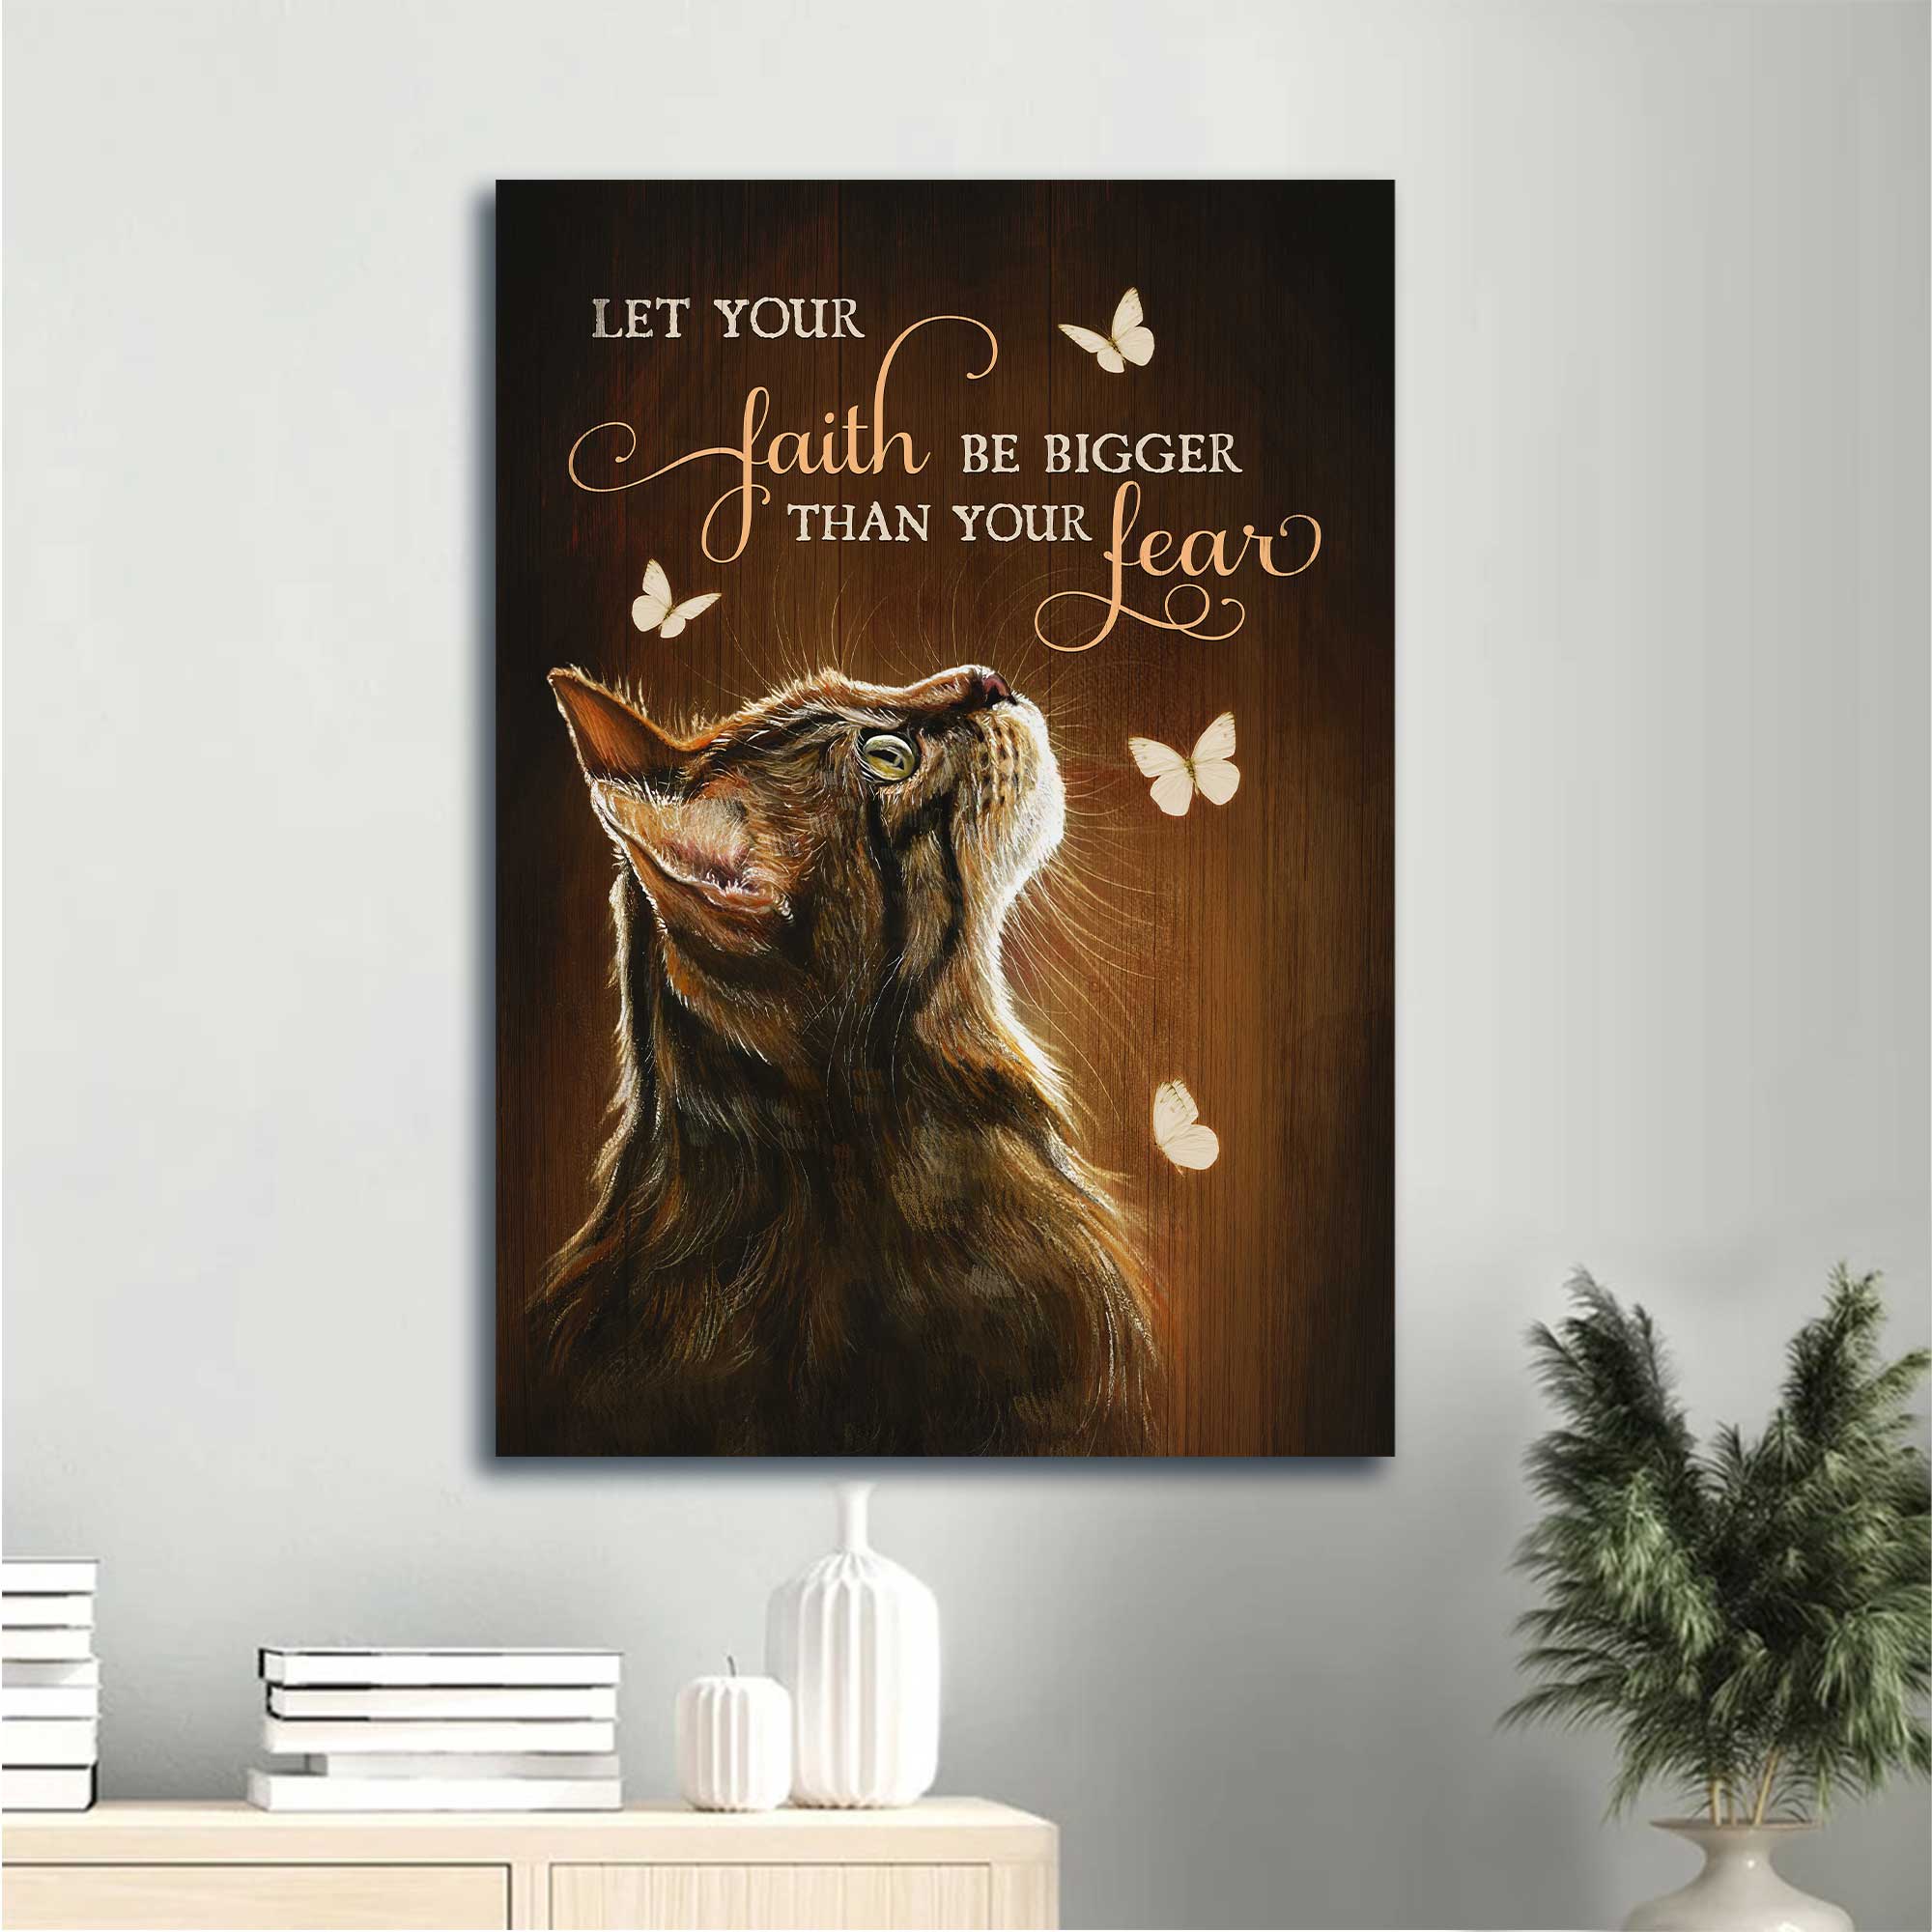 Jesus And Cat Portrait Canvas - Tabby Cat, White Butterfly Canvas - Gift For Christian, Cat Lovers - Let Your Faith Be Bigger Than Your Fear Canvas